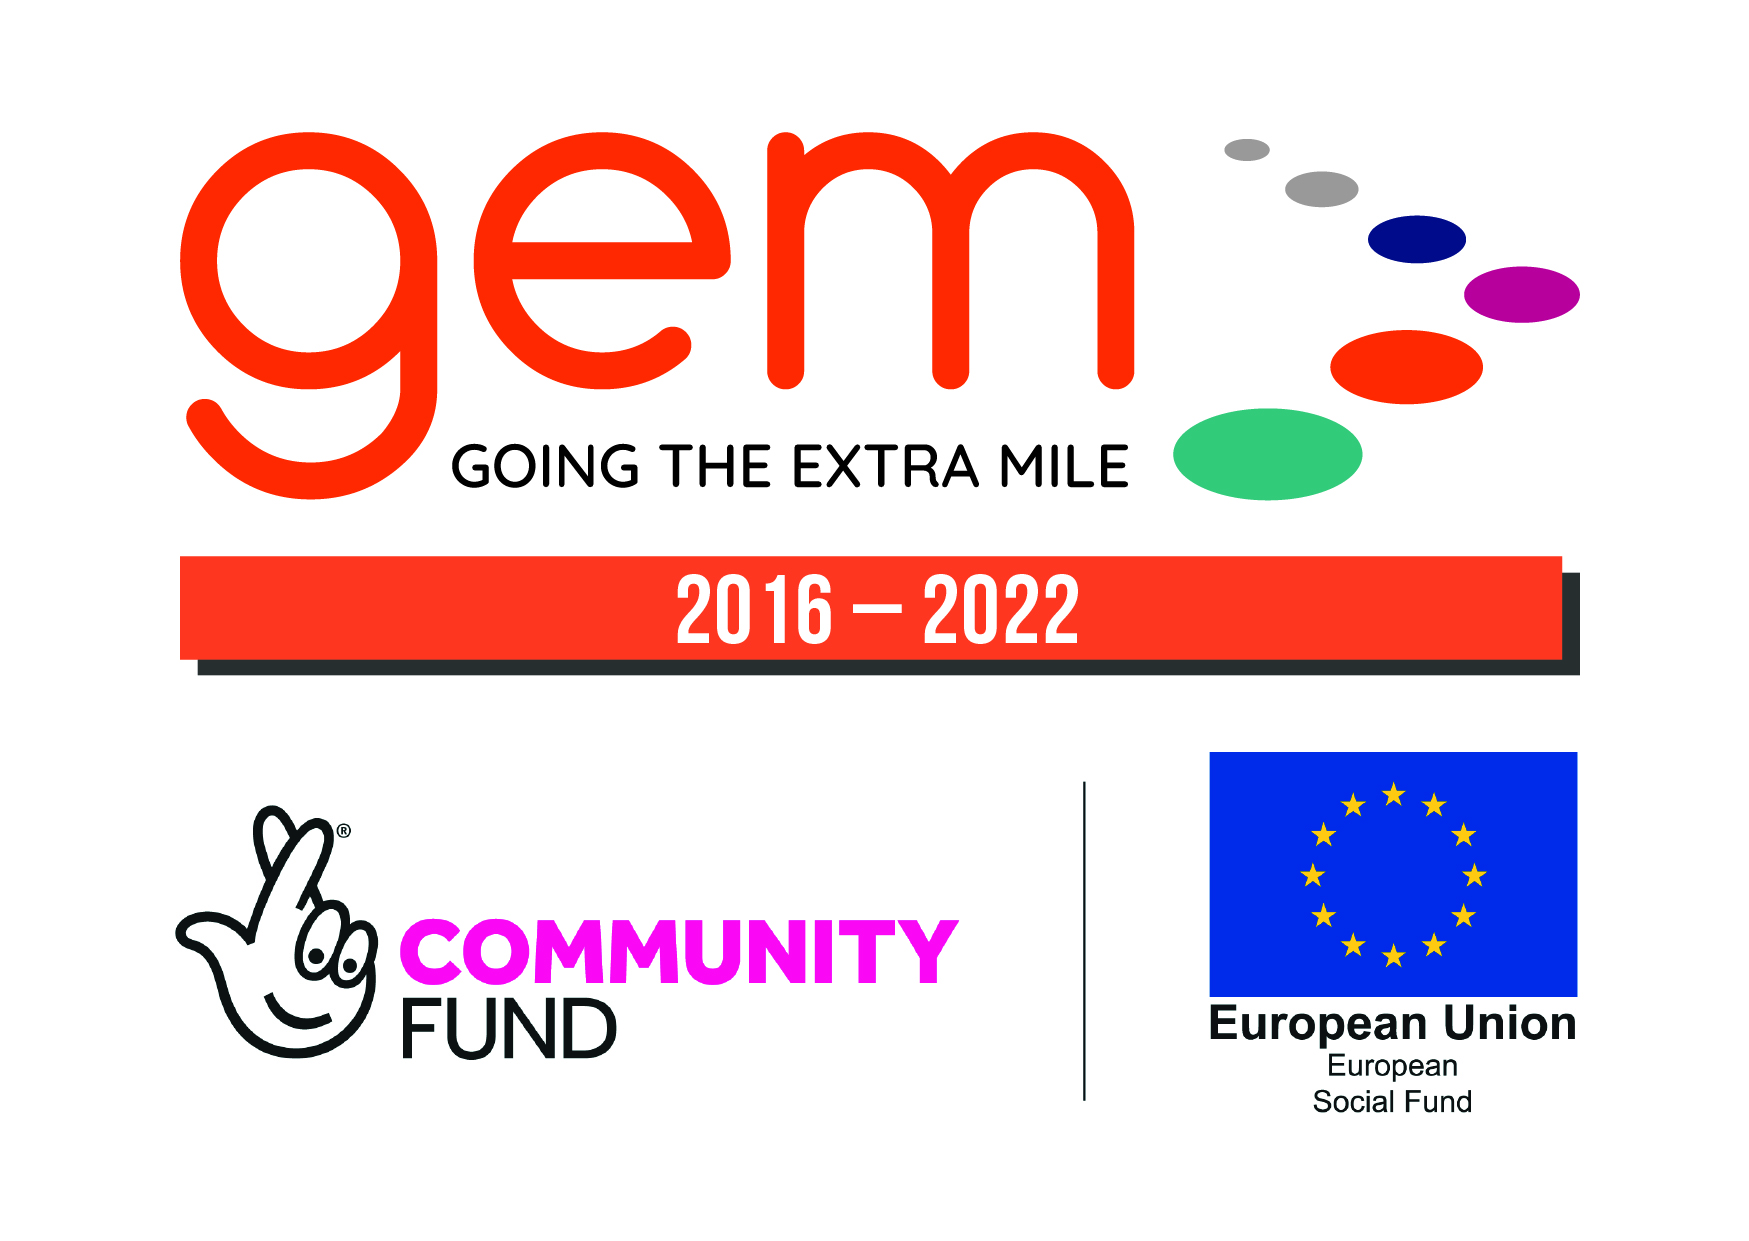 GEM logo showing it was active from 2016 - 2022 and funded by the Community Fund and European Union Social Fund.